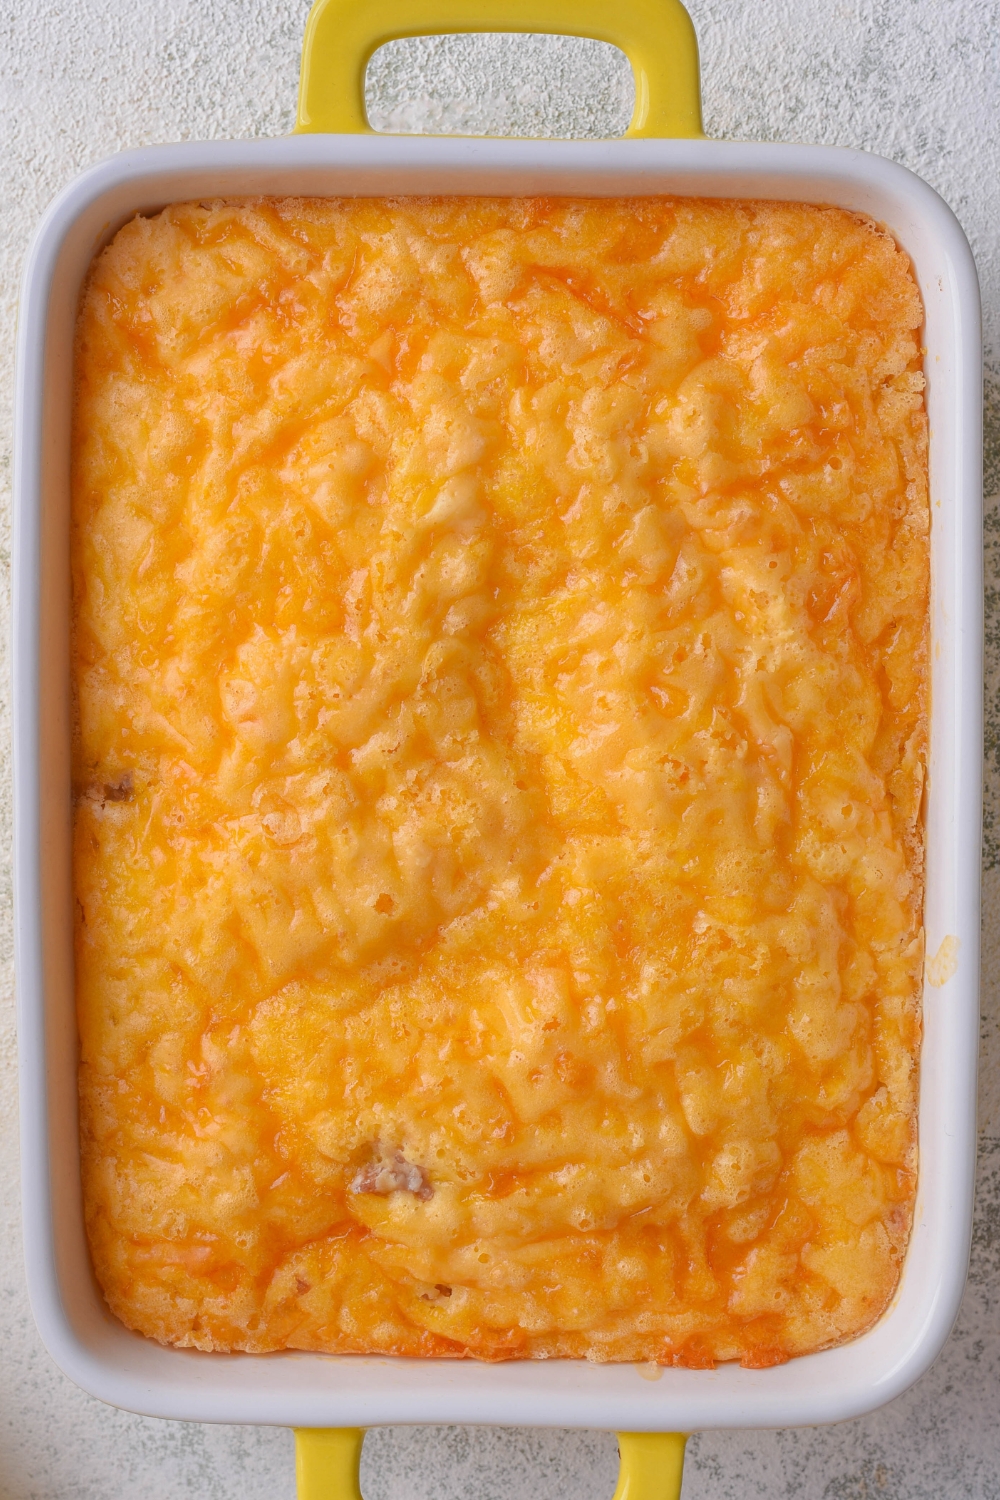 A casserole dish with cooked breakfast casserole.